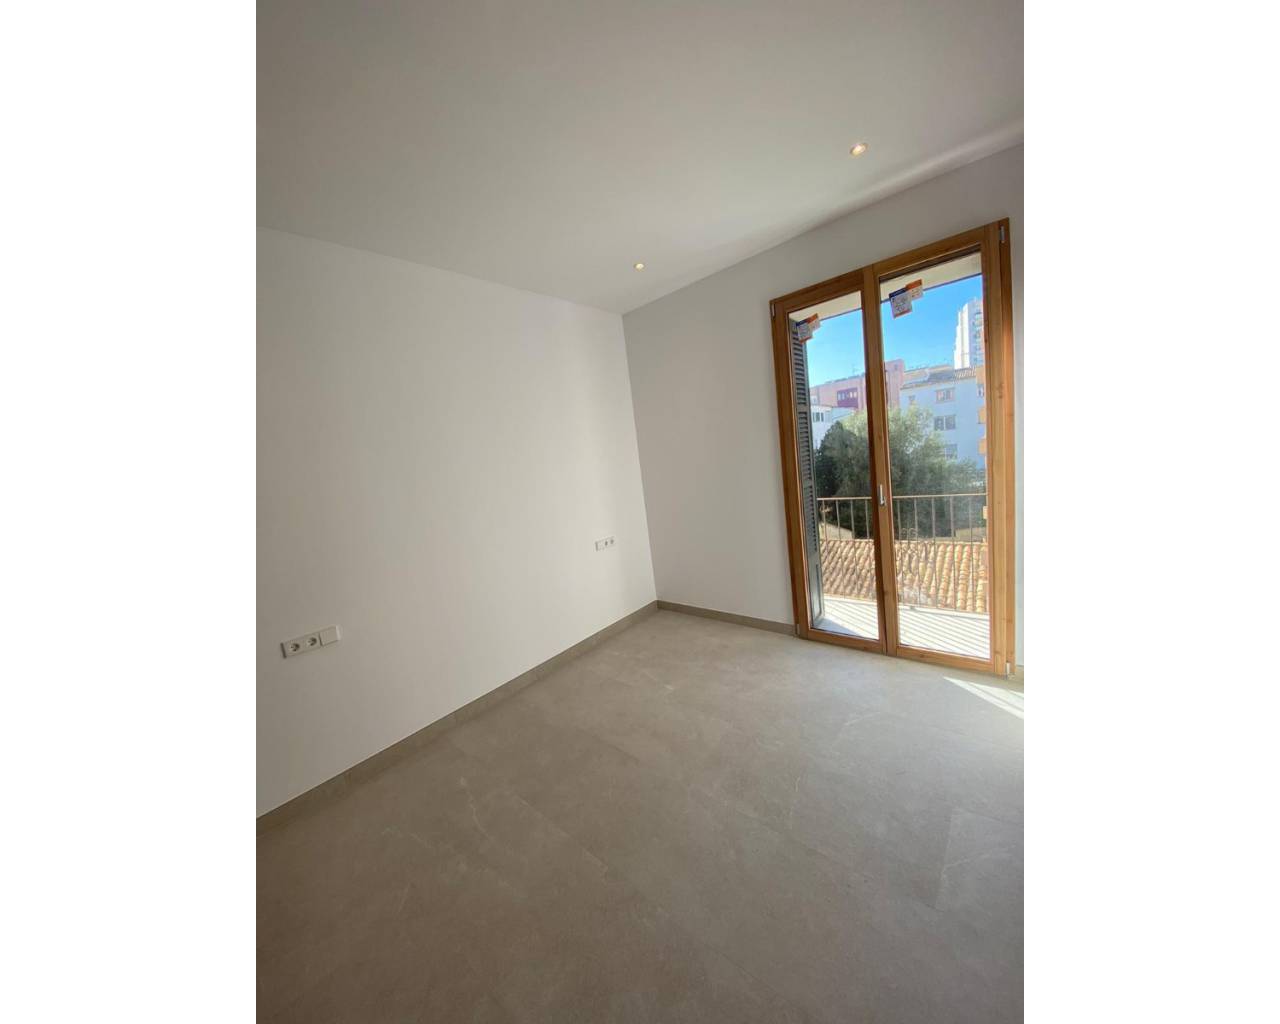 Affordable property in rent in Palma de Mallorca